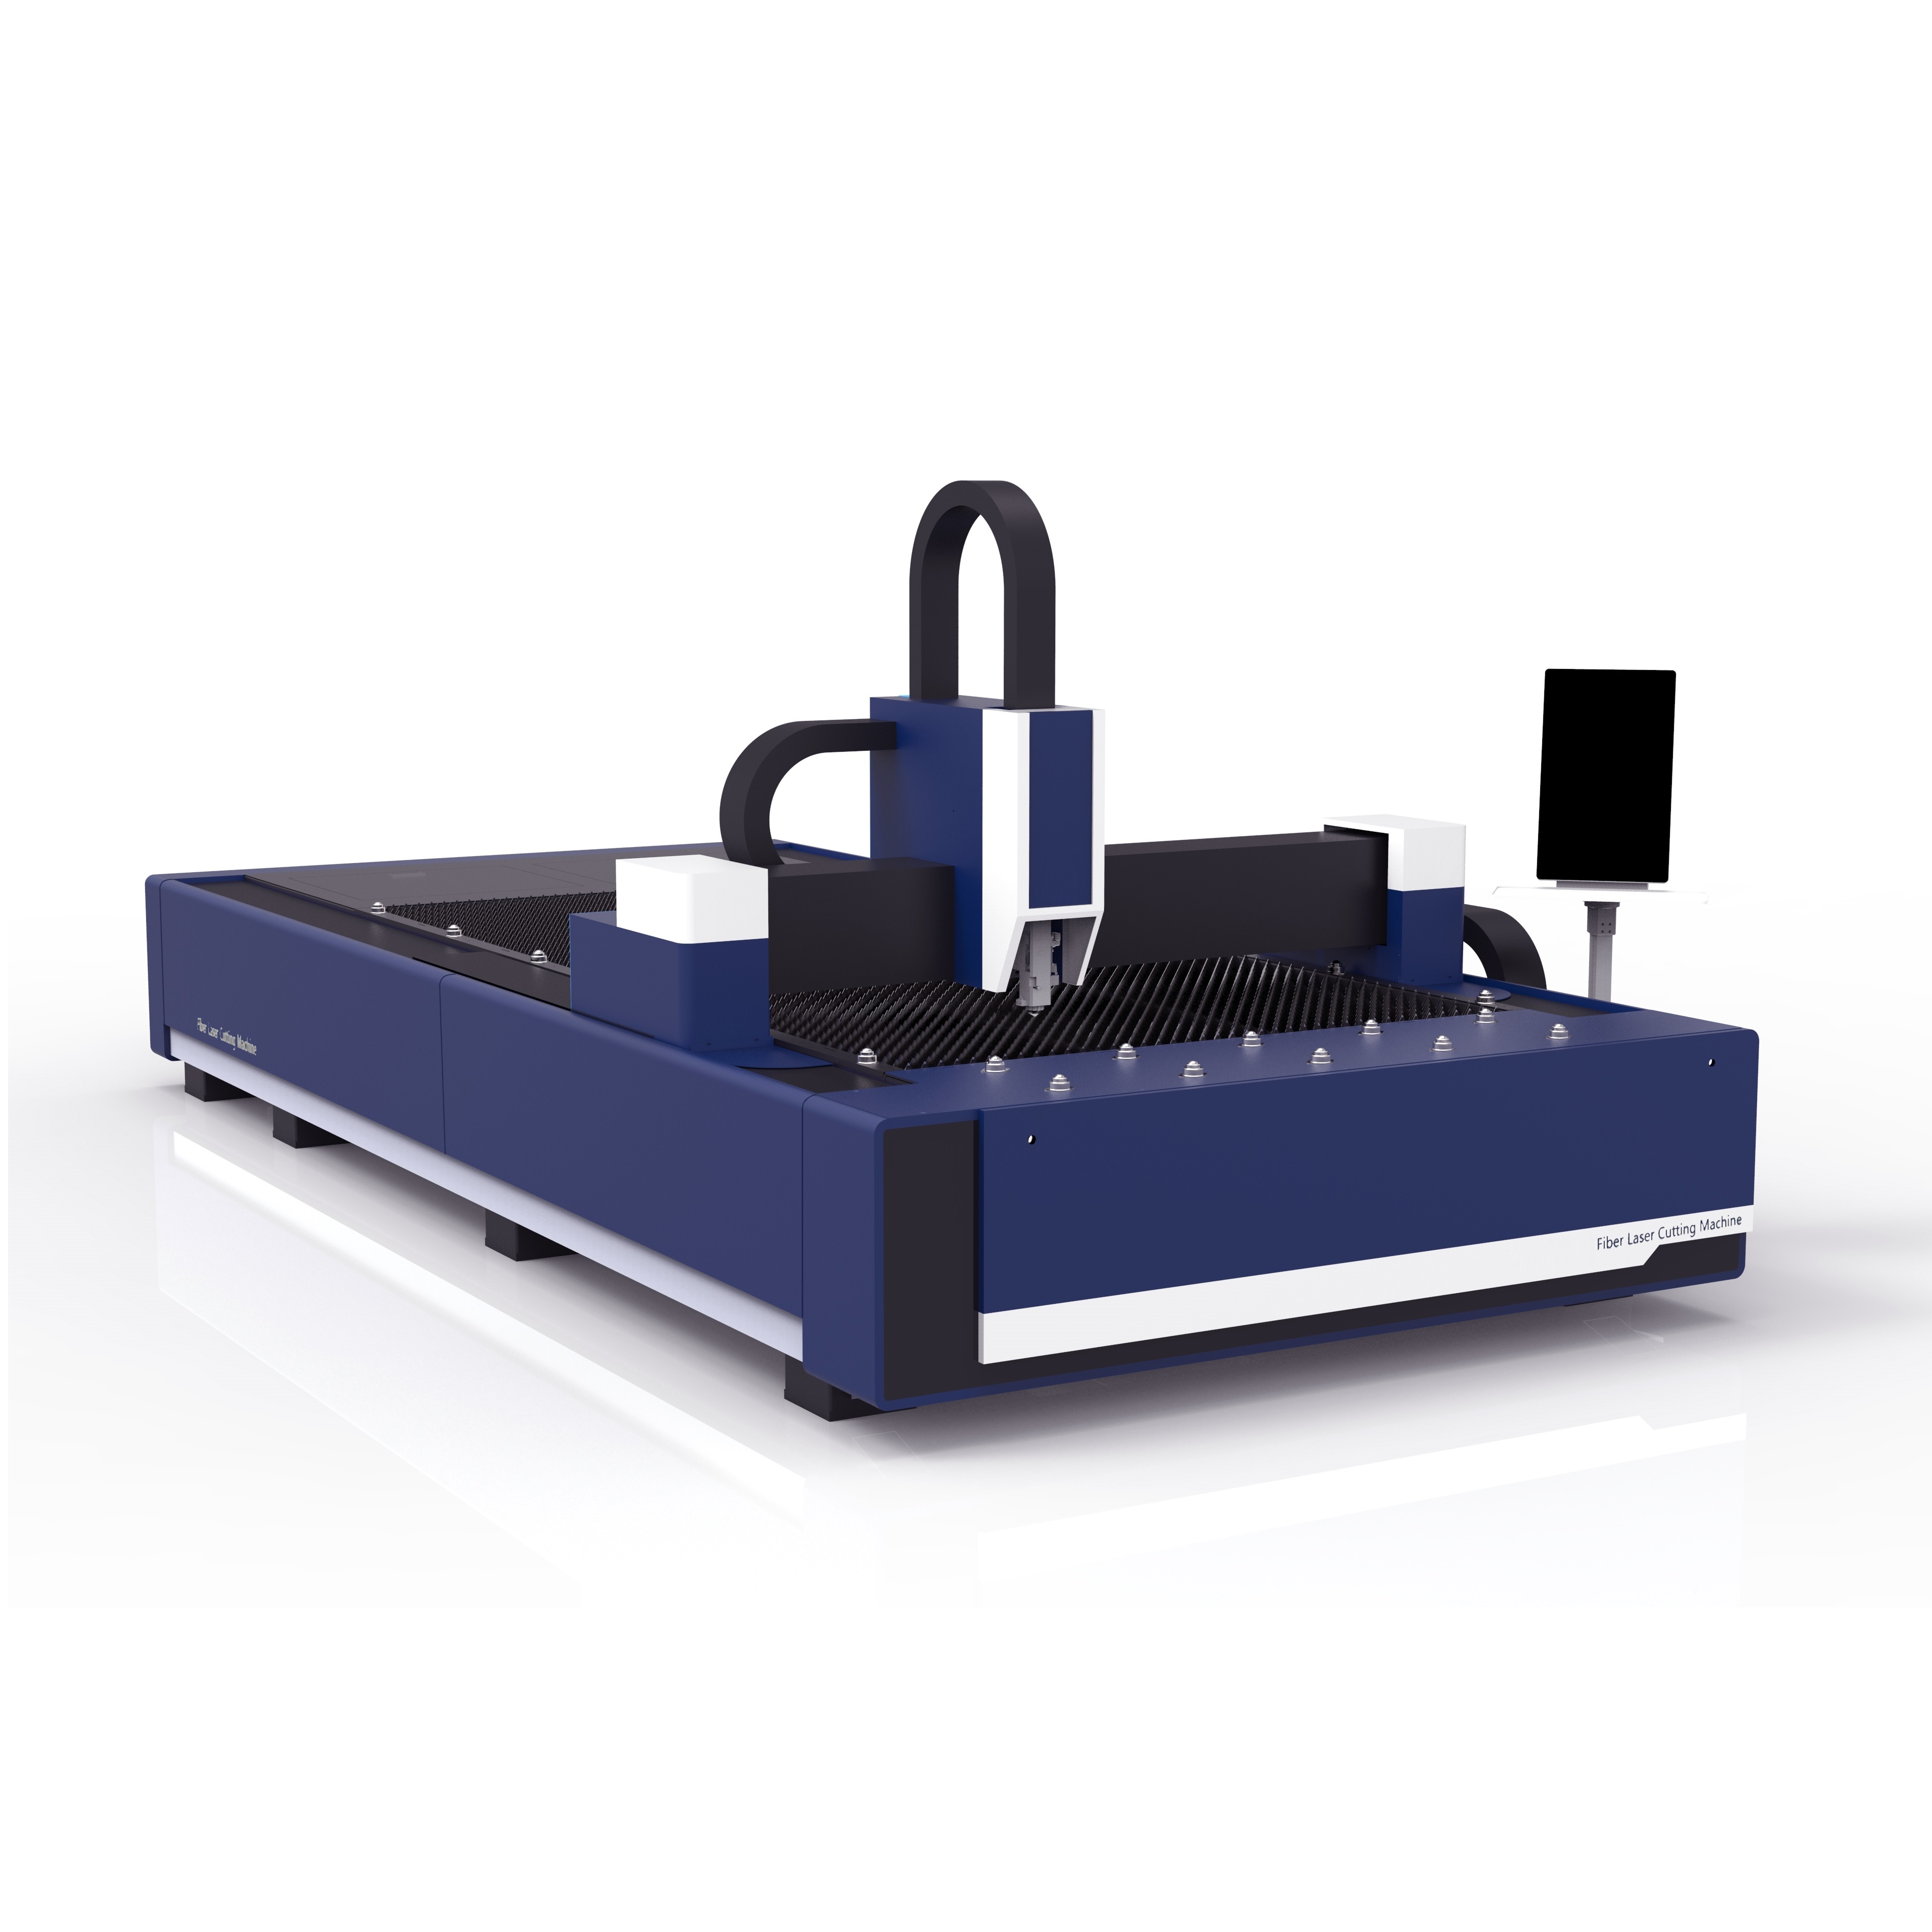 1530 Raycus IPG Fiber Laser Metal Cutter Cutting Machine with Cypcut Control System